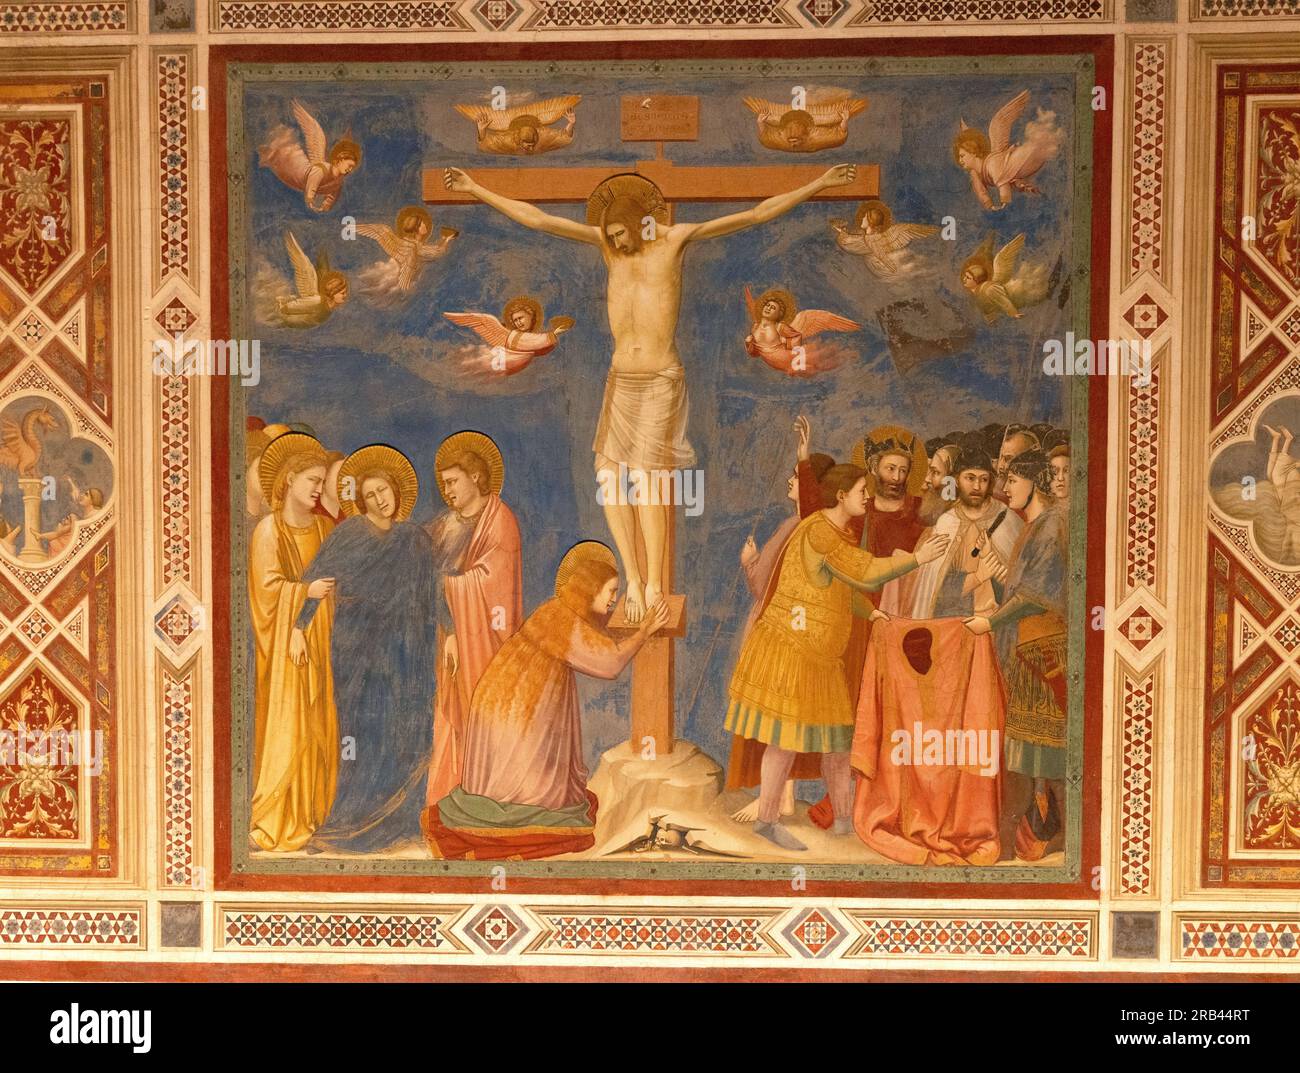 Giotto frescoes, the Scrovegni Chapel, Padua Italy - Italian Renaissance paintings of the Life of Christ; here, 'Crucifixion of Christ'; - Art History Stock Photo